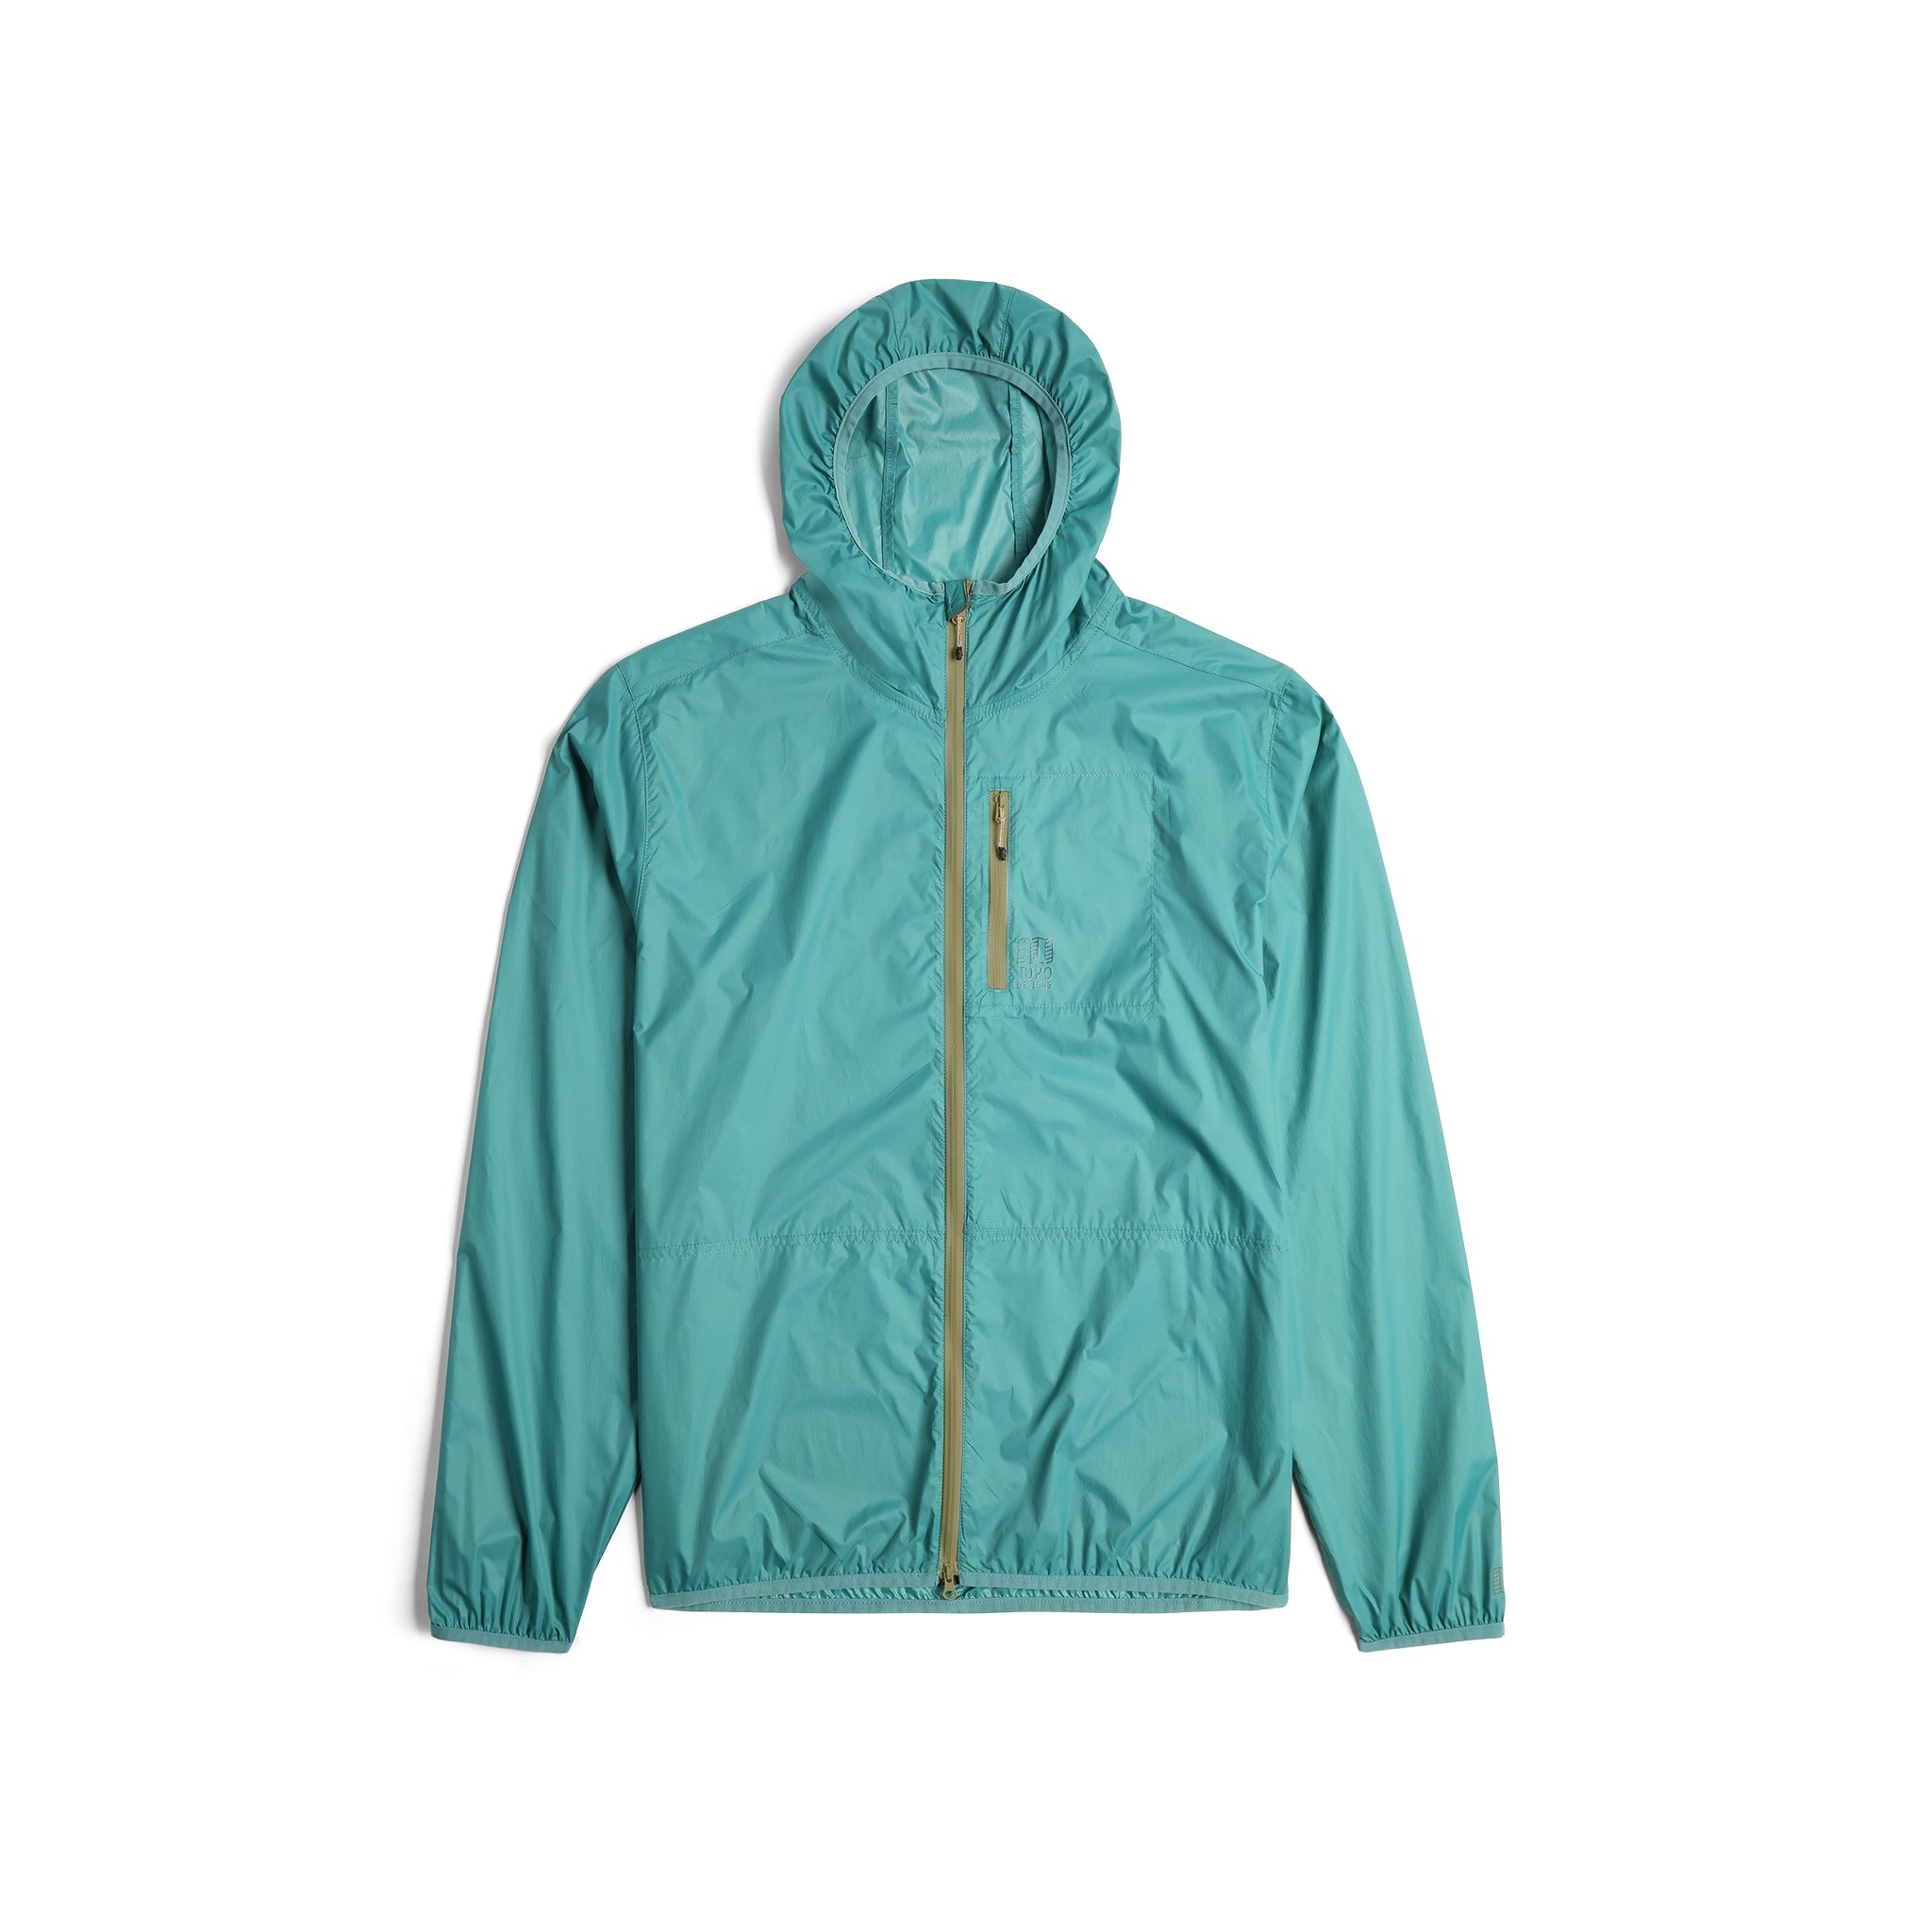 Front View of Topo Designs Global Ultralight Packable Jacket - Men's in "Caribbean"